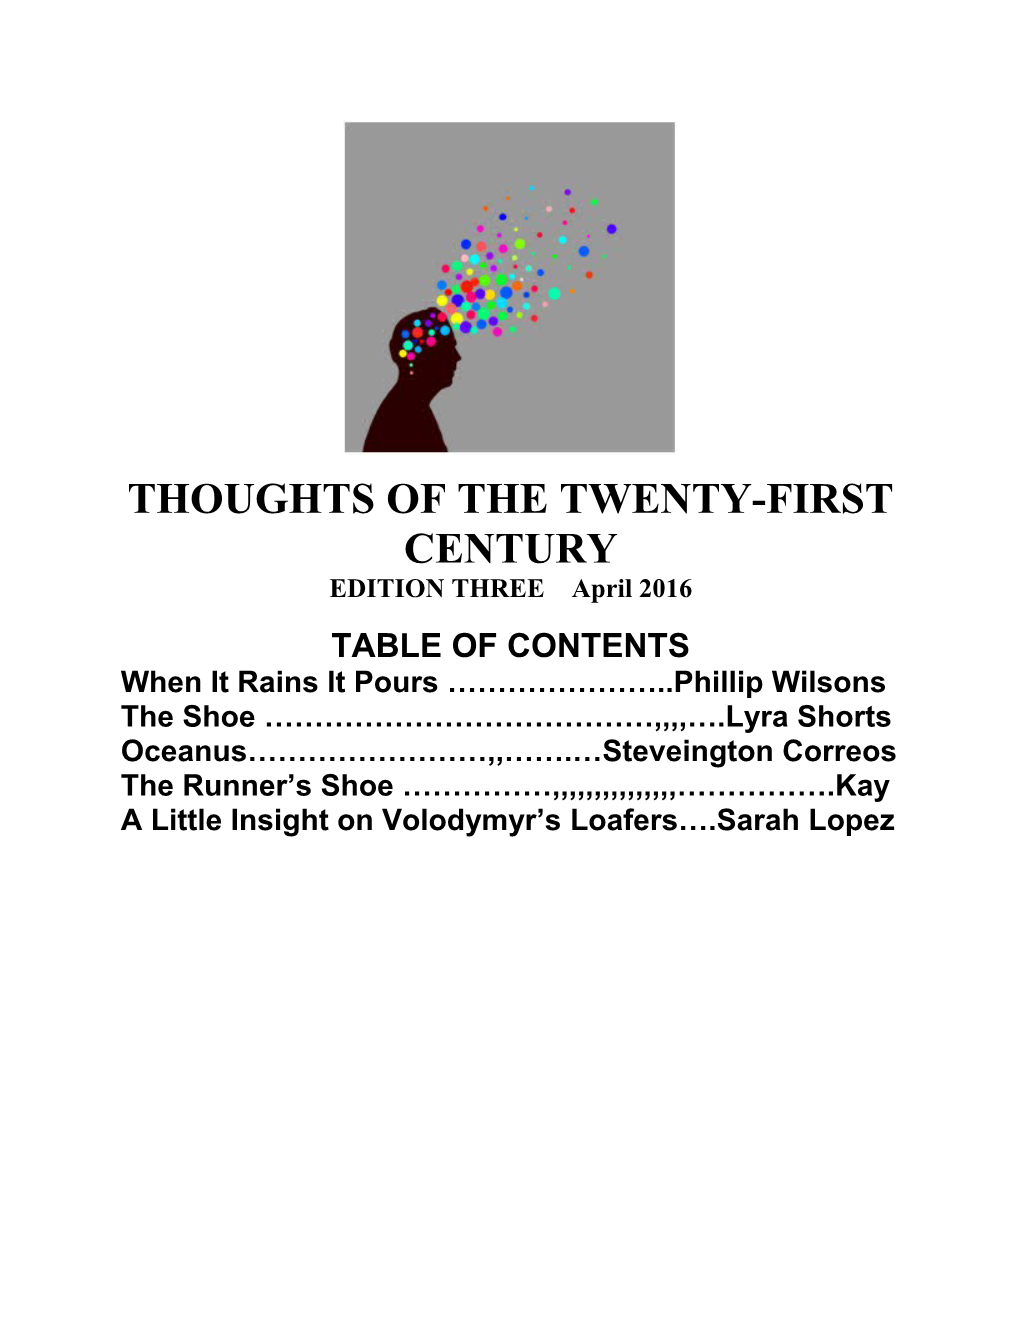 Thoughts of the Twenty-First Century